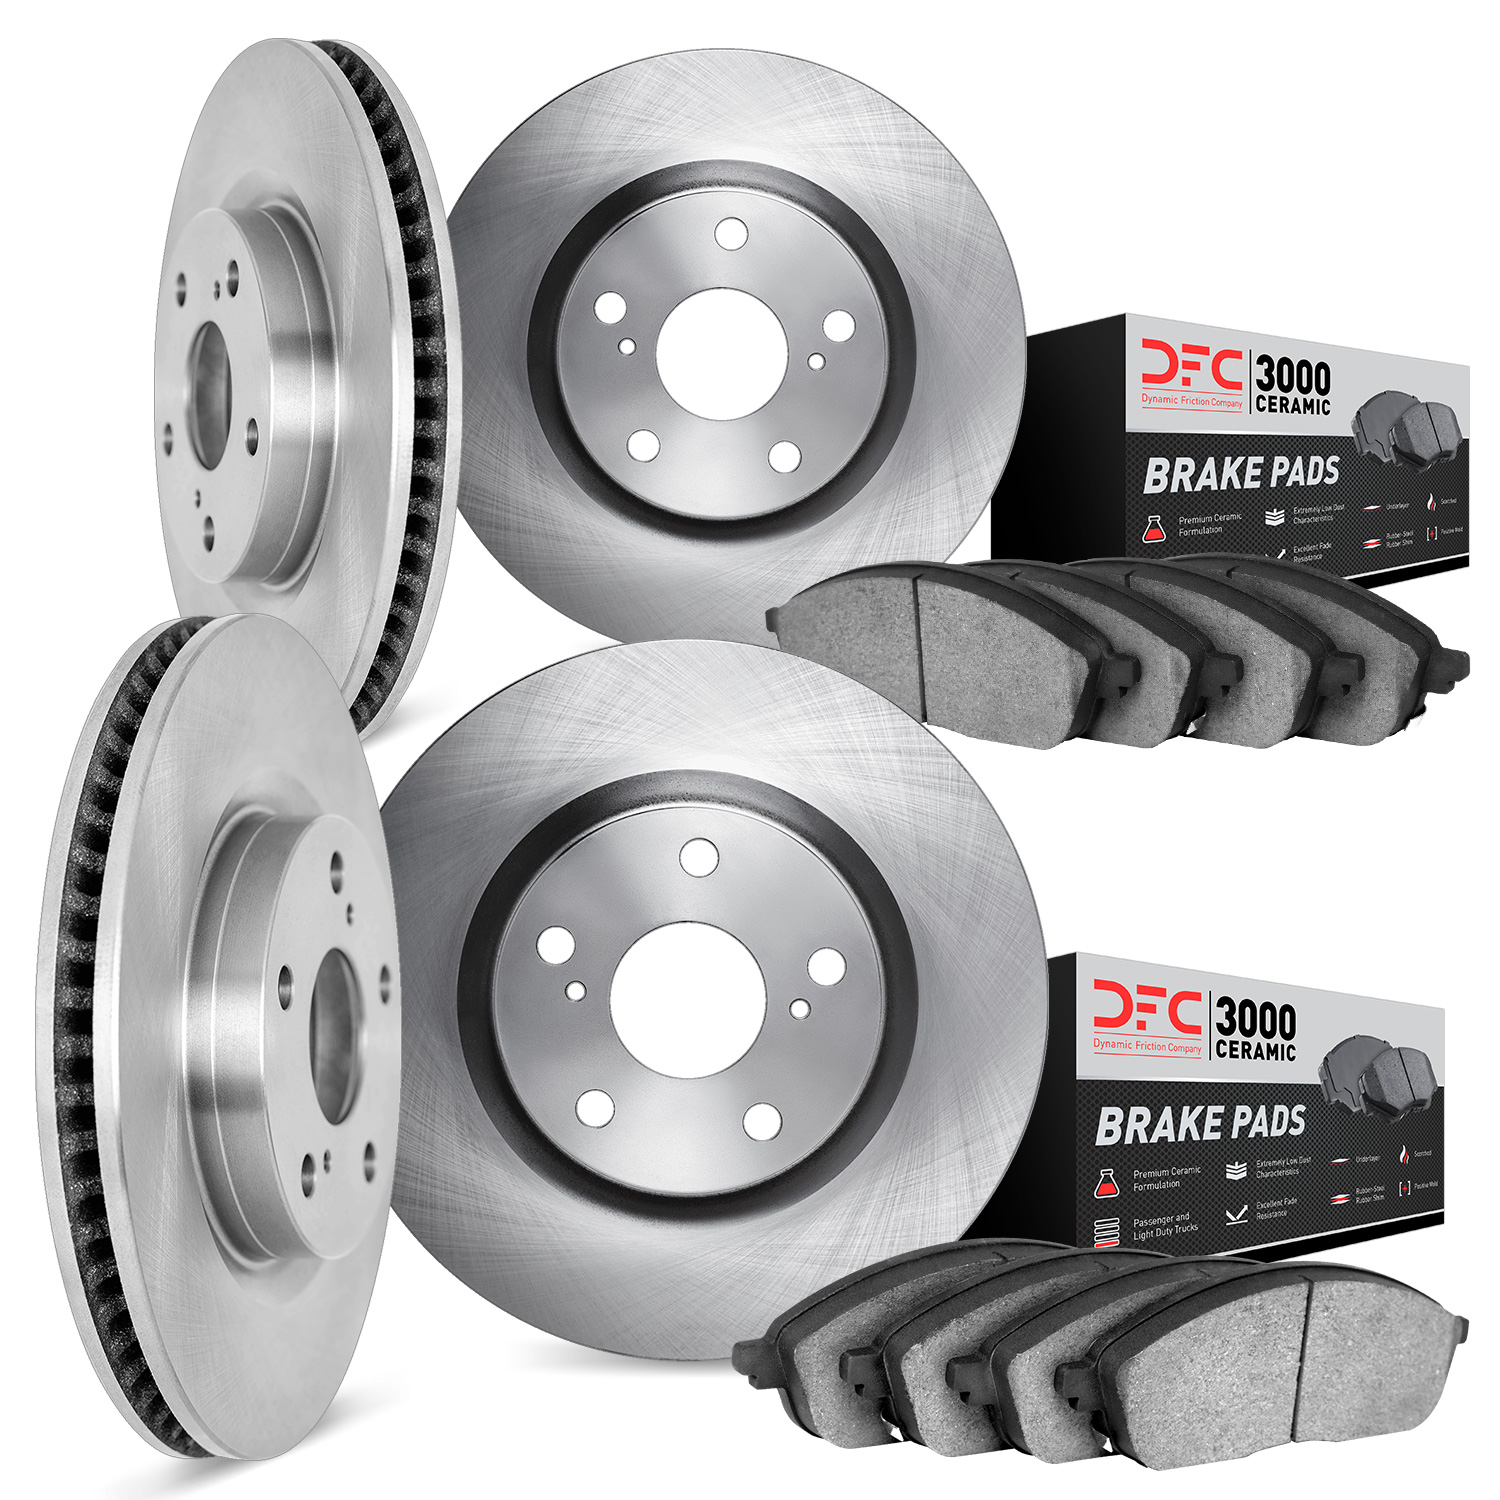 6304-75009 Brake Rotors with 3000-Series Ceramic Brake Pads Kit, 2001-2006 Lexus/Toyota/Scion, Position: Front and Rear